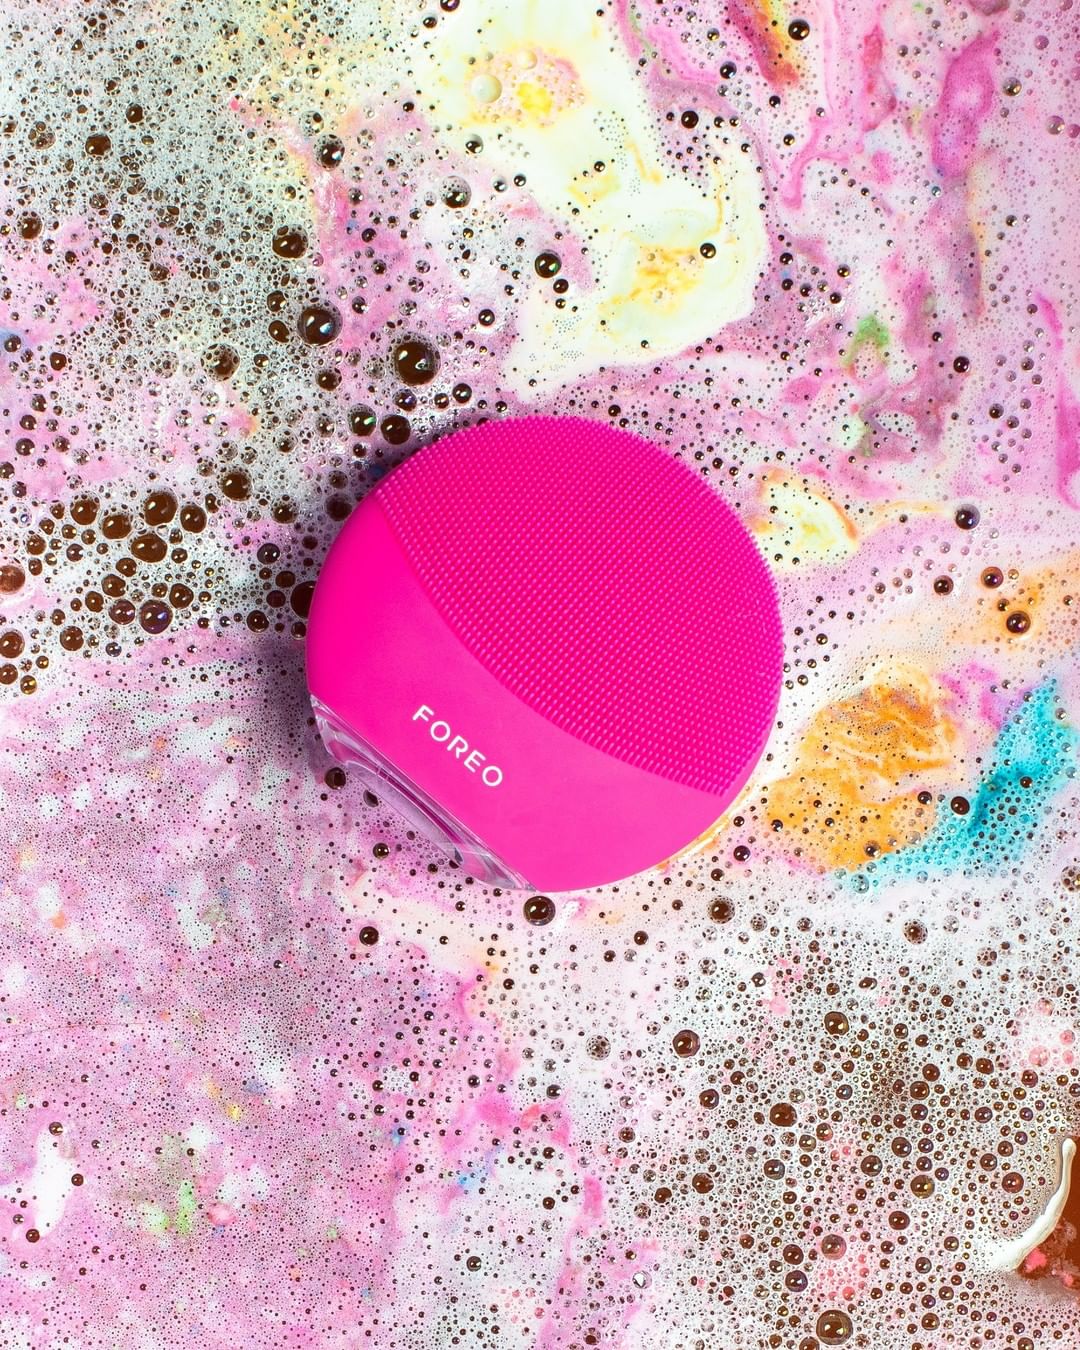 FOREO - It's always important to keep up with your skincare game!⁣
⁣
#FOREOfan Cindy's personal fav is her LUNA mini 3 by FOREO Sweden 💗: "I enjoy creating a spa-at-home mood where I dim the lights, l...